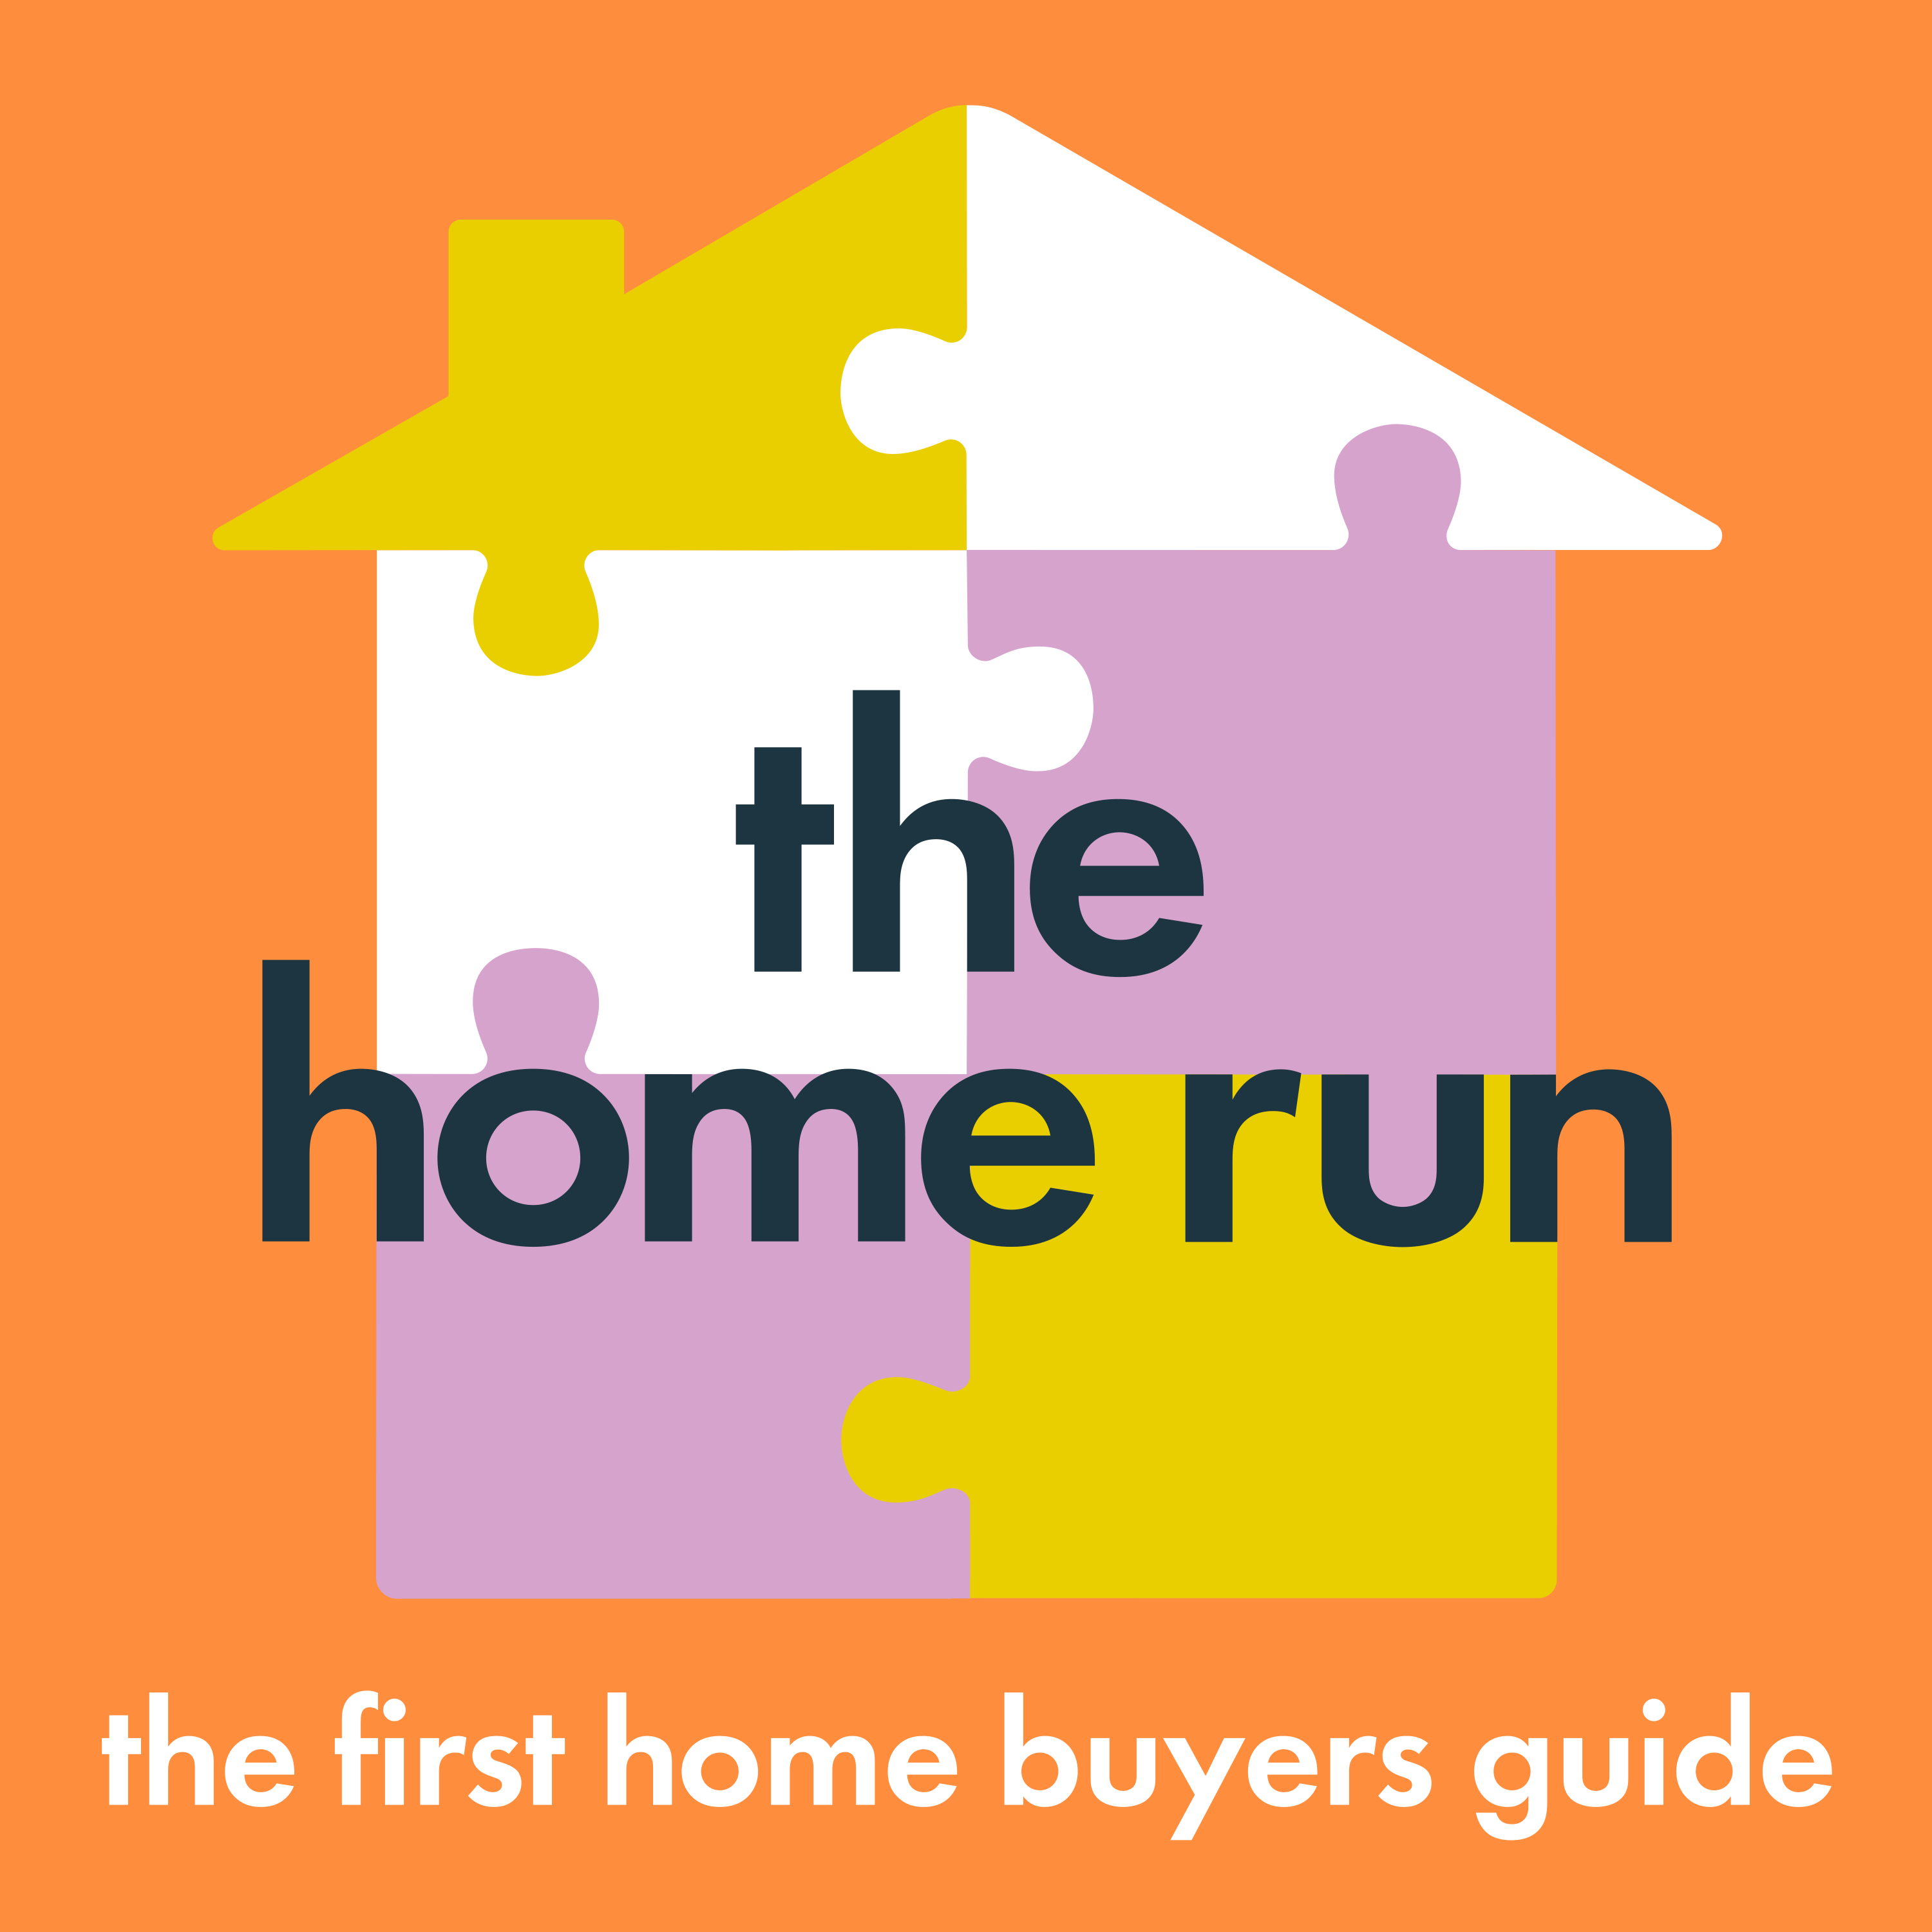 Building a team to help you purchase your first property